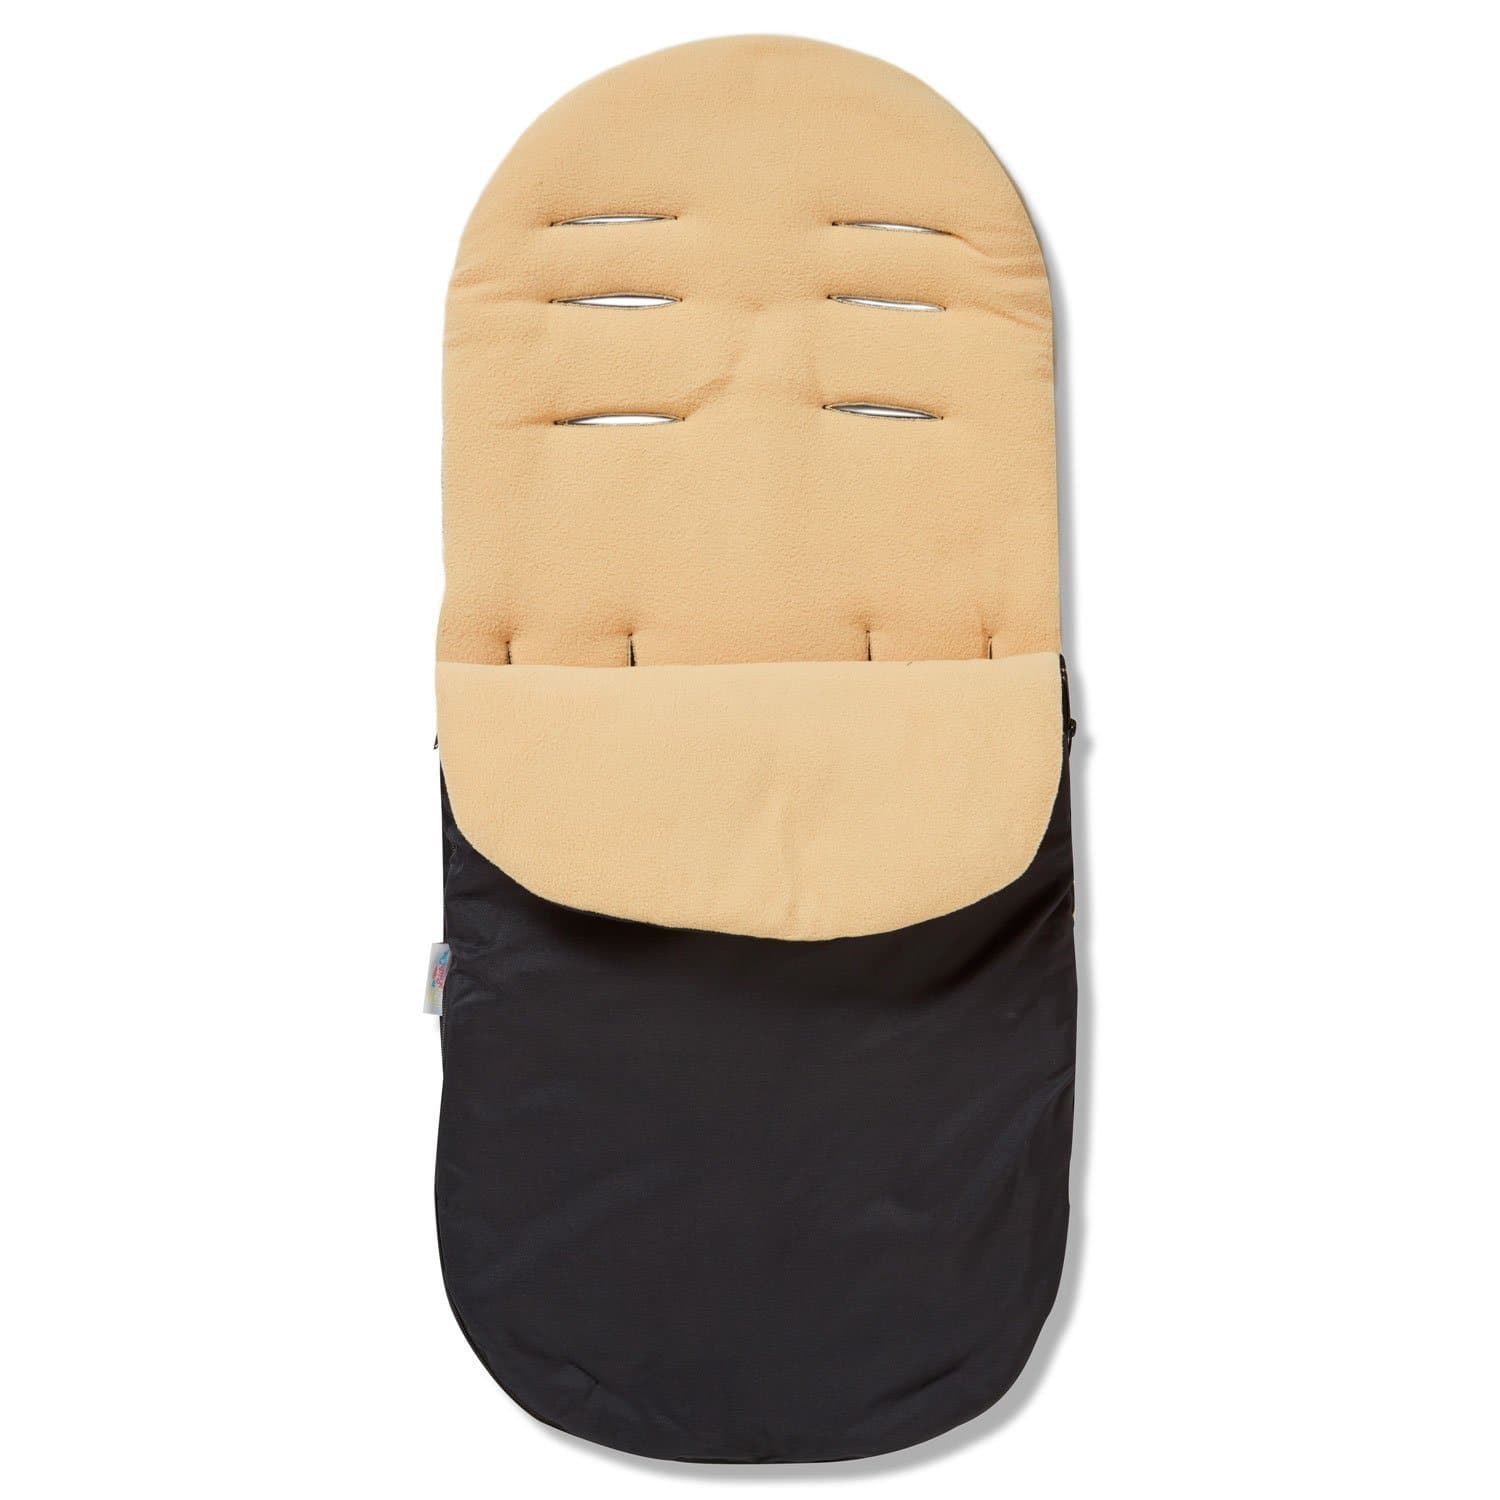 Footmuff / Cosy Toes Compatible with Brevi - Sand / Fits All Models | For Your Little One